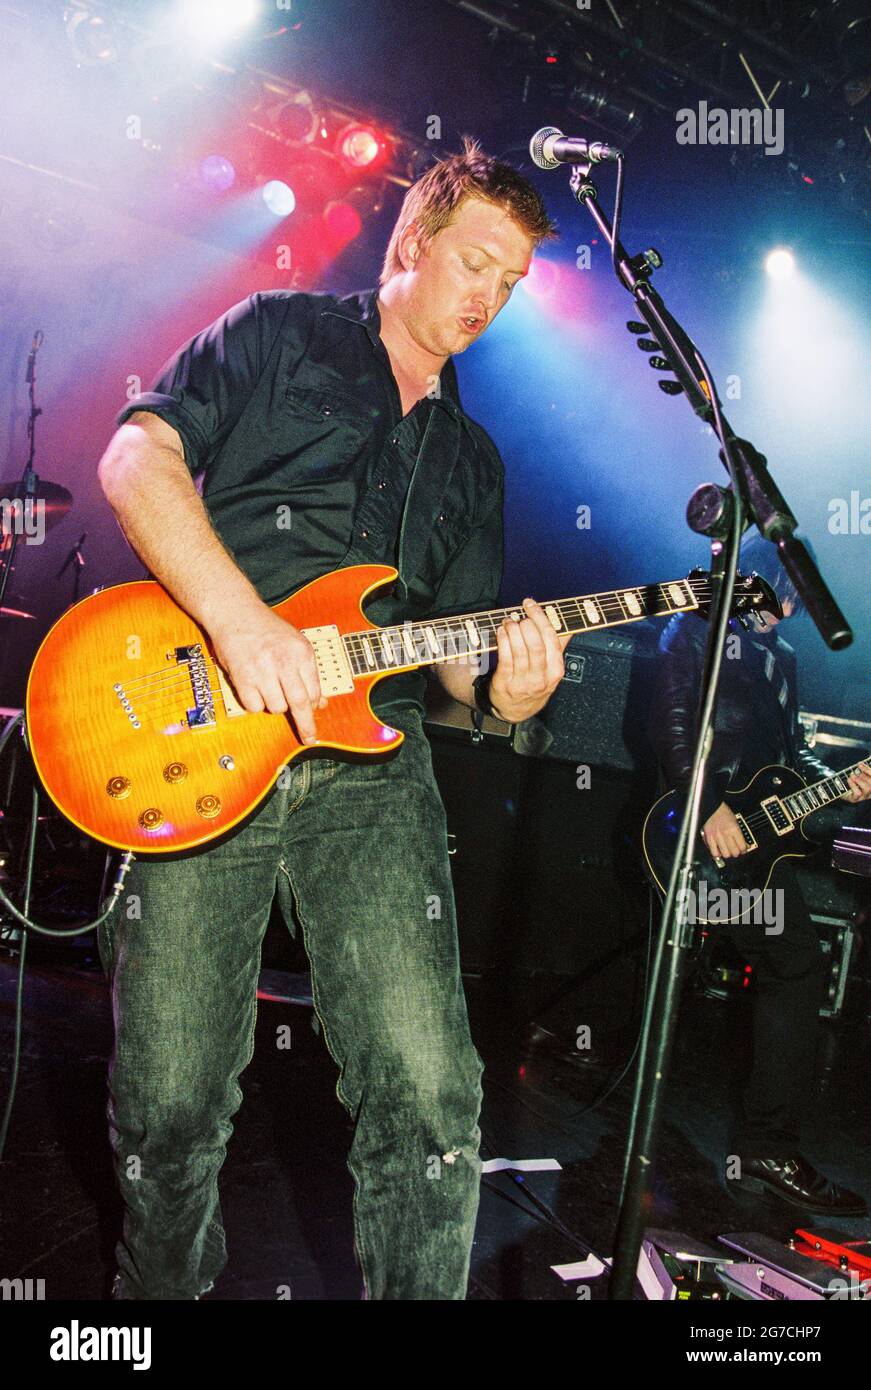 Queens of the stoneage QOTSA performing at the Mean Fiddler 2 25th June 2002, London Astoria Theatre, London, England, United Kingdom. Stock Photo